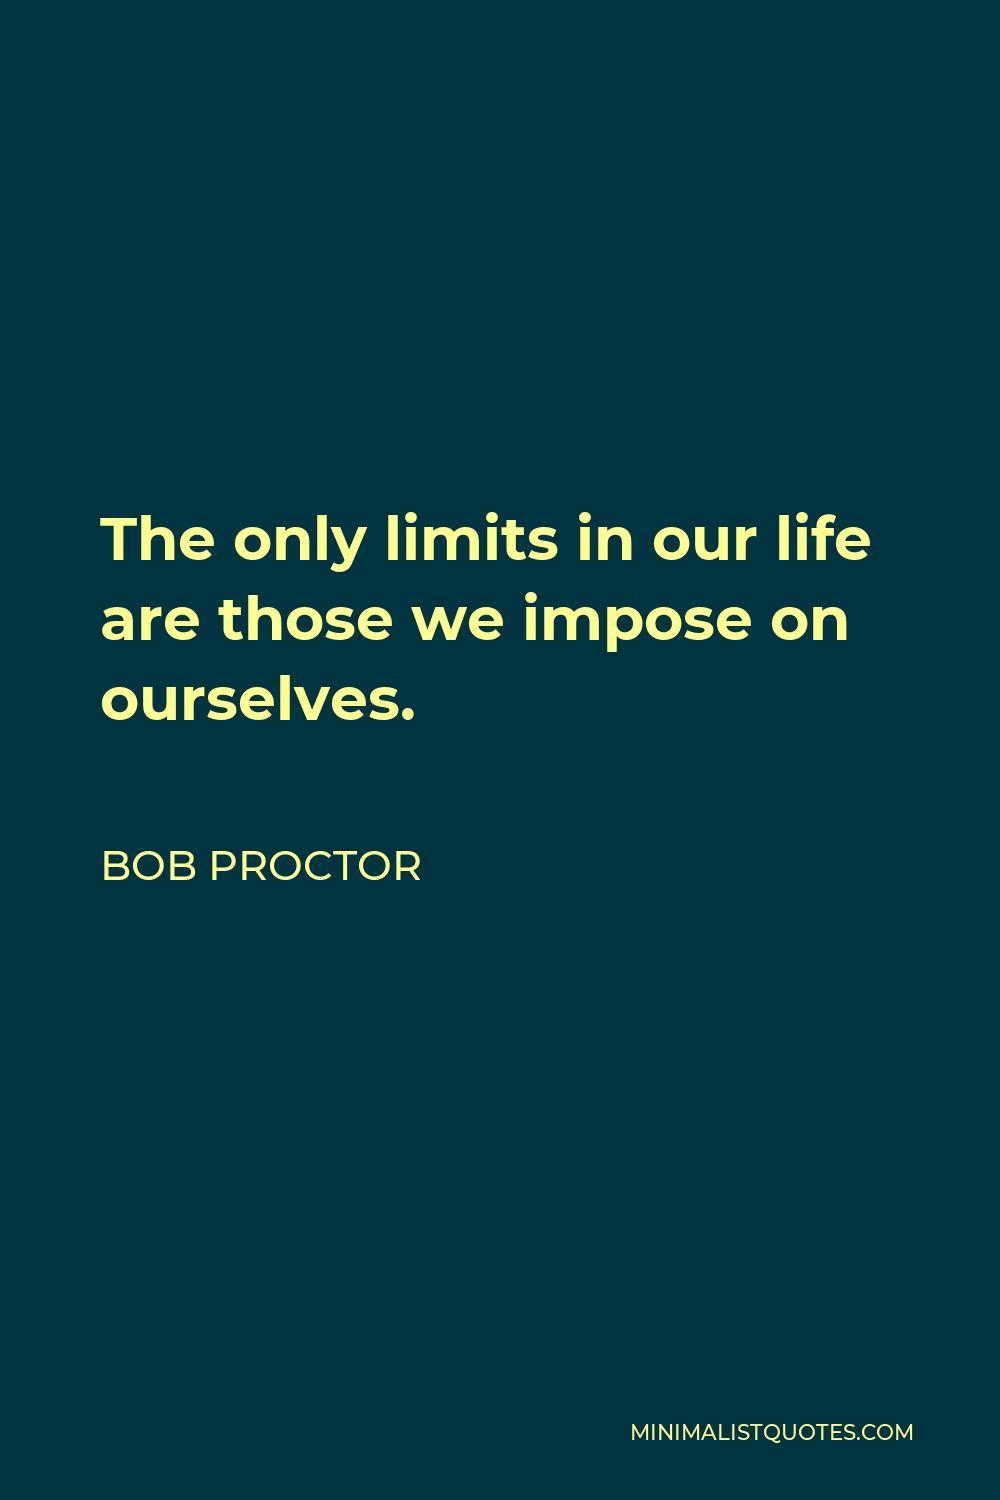 Bob Proctor Quote - The only limits in our life are those we impose on ourselves.